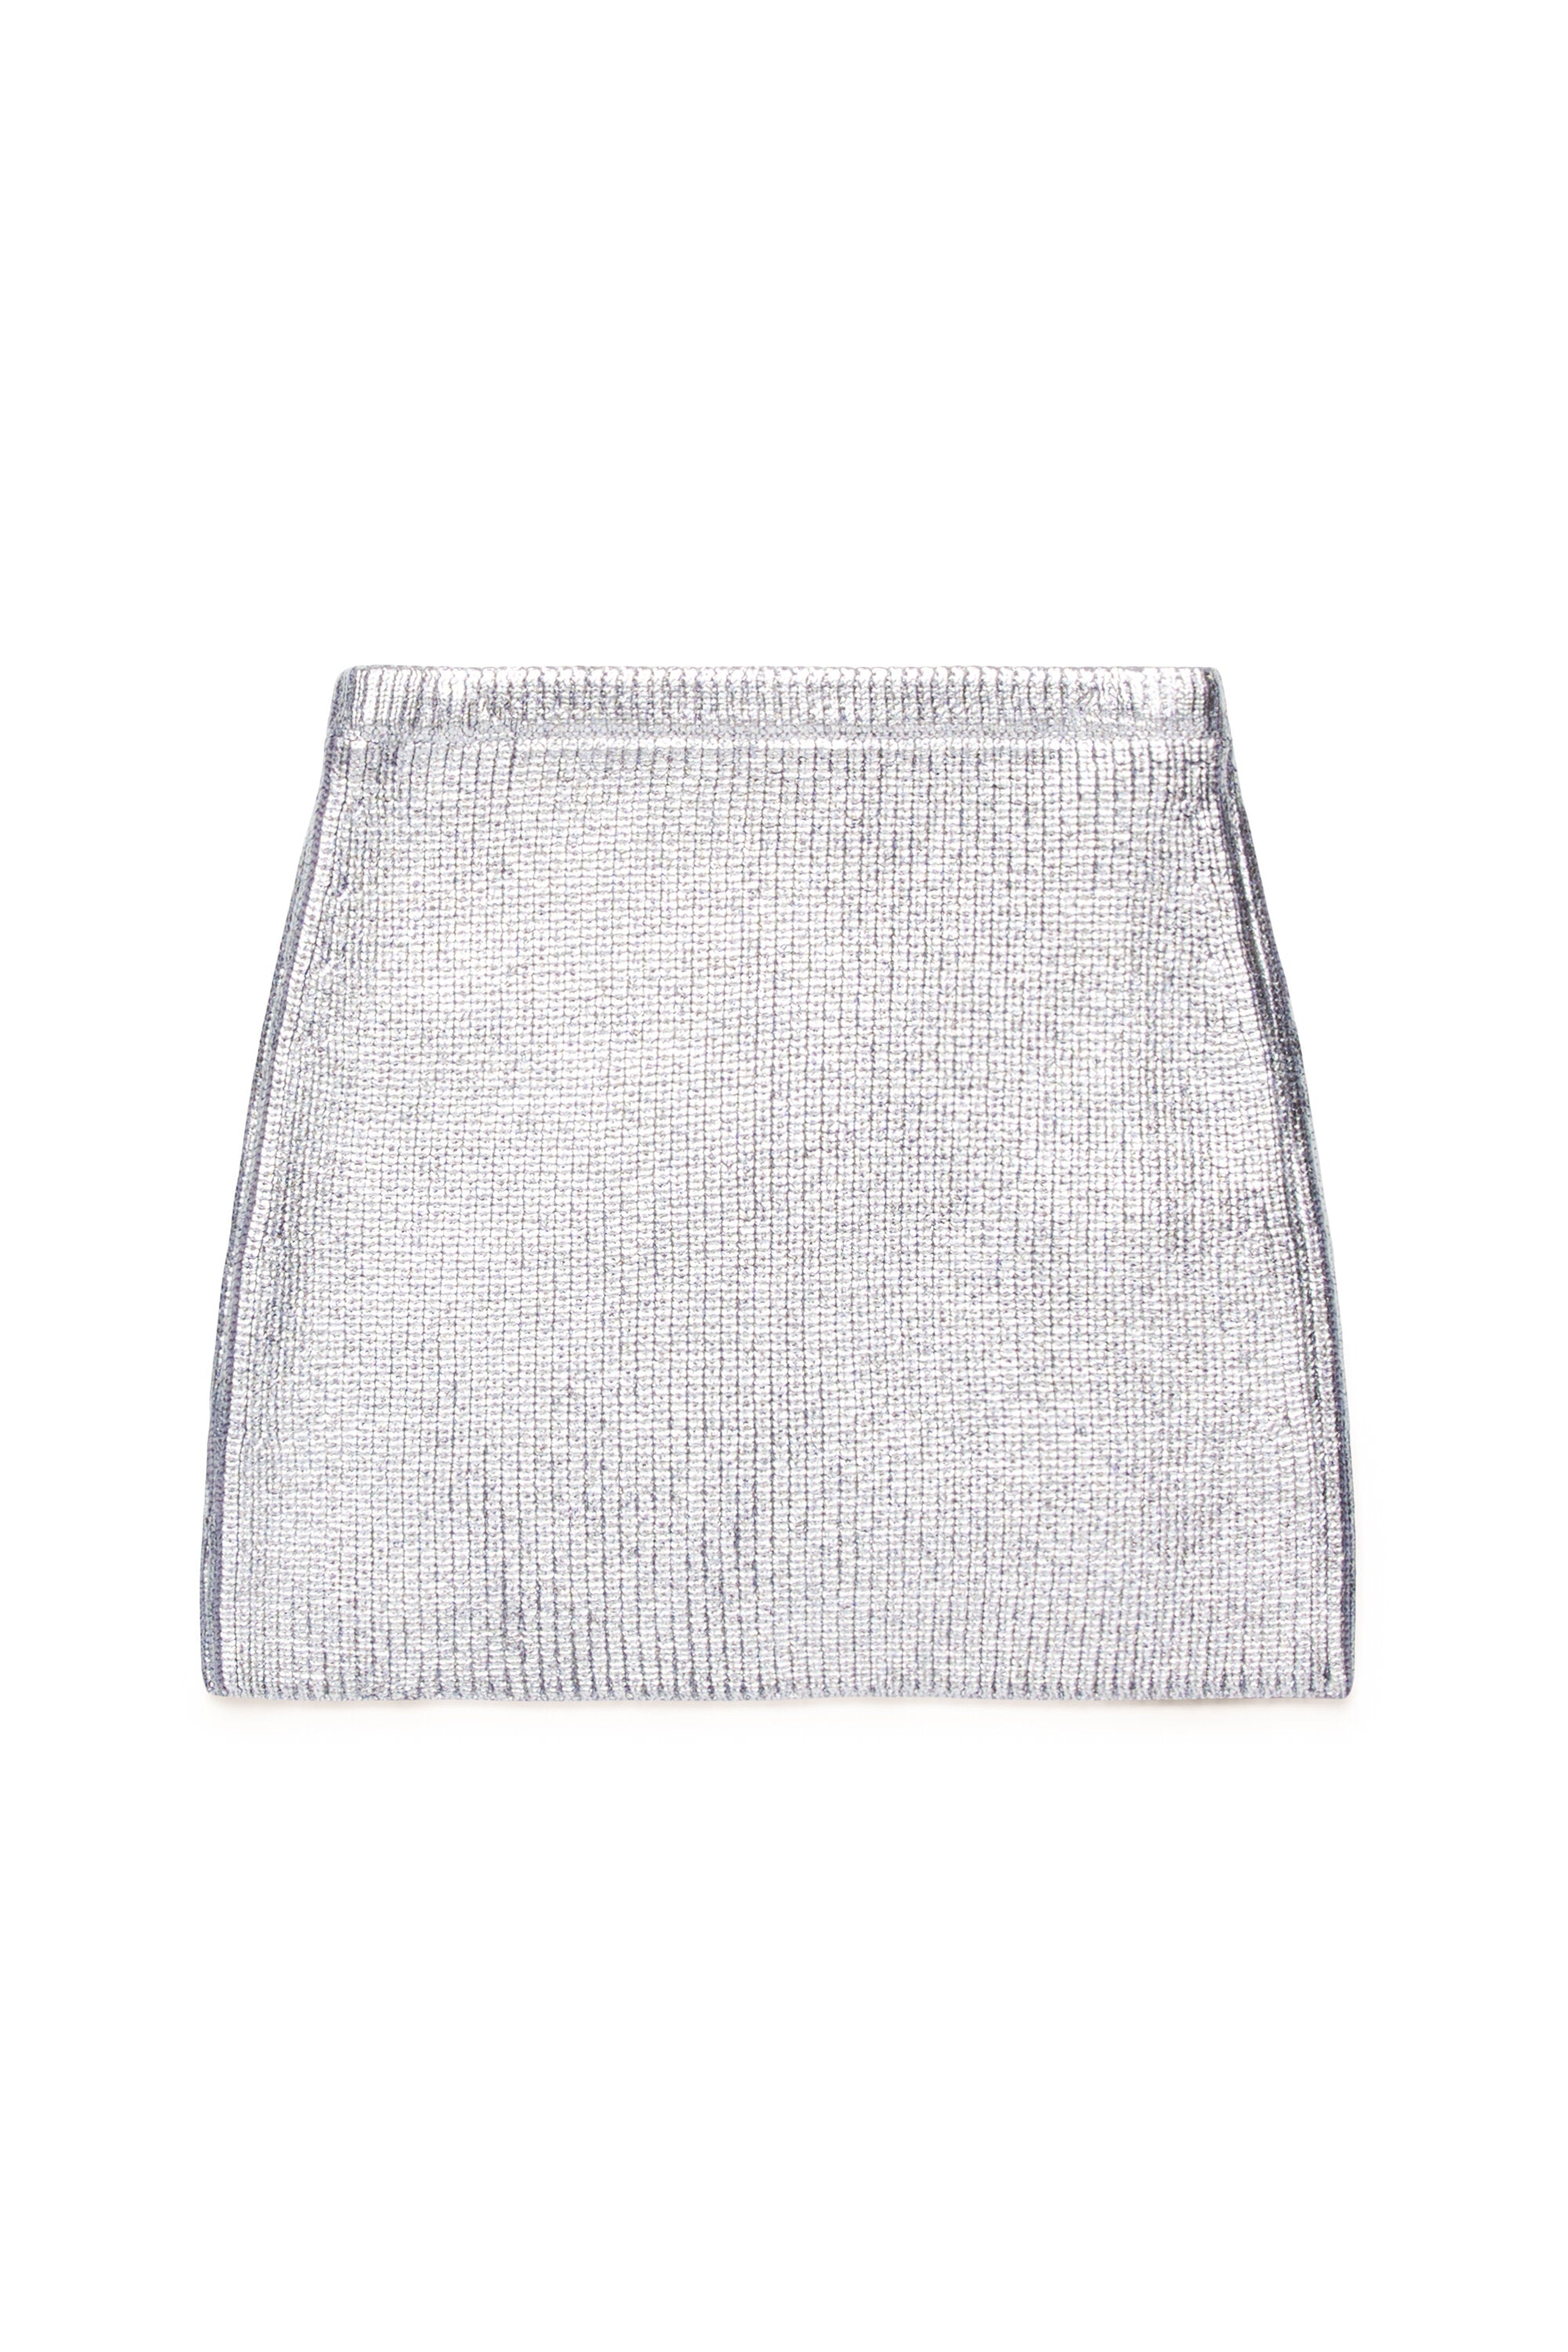 All-over silver mylar ribbed skirt